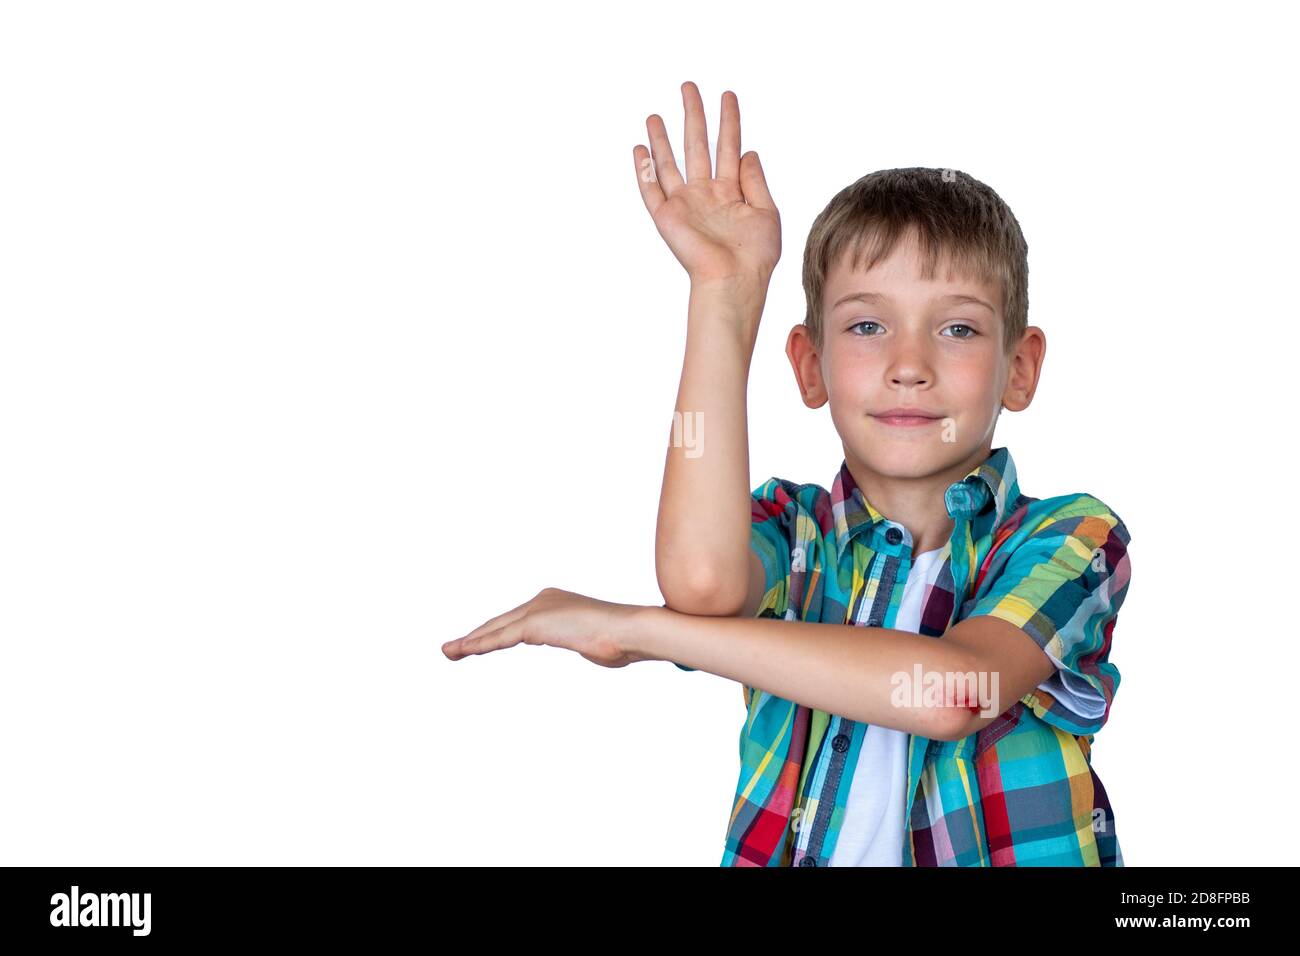 A smart, cute boy raises his hand to answer in class. Happy child against white board. Education concept, back to school Stock Photo